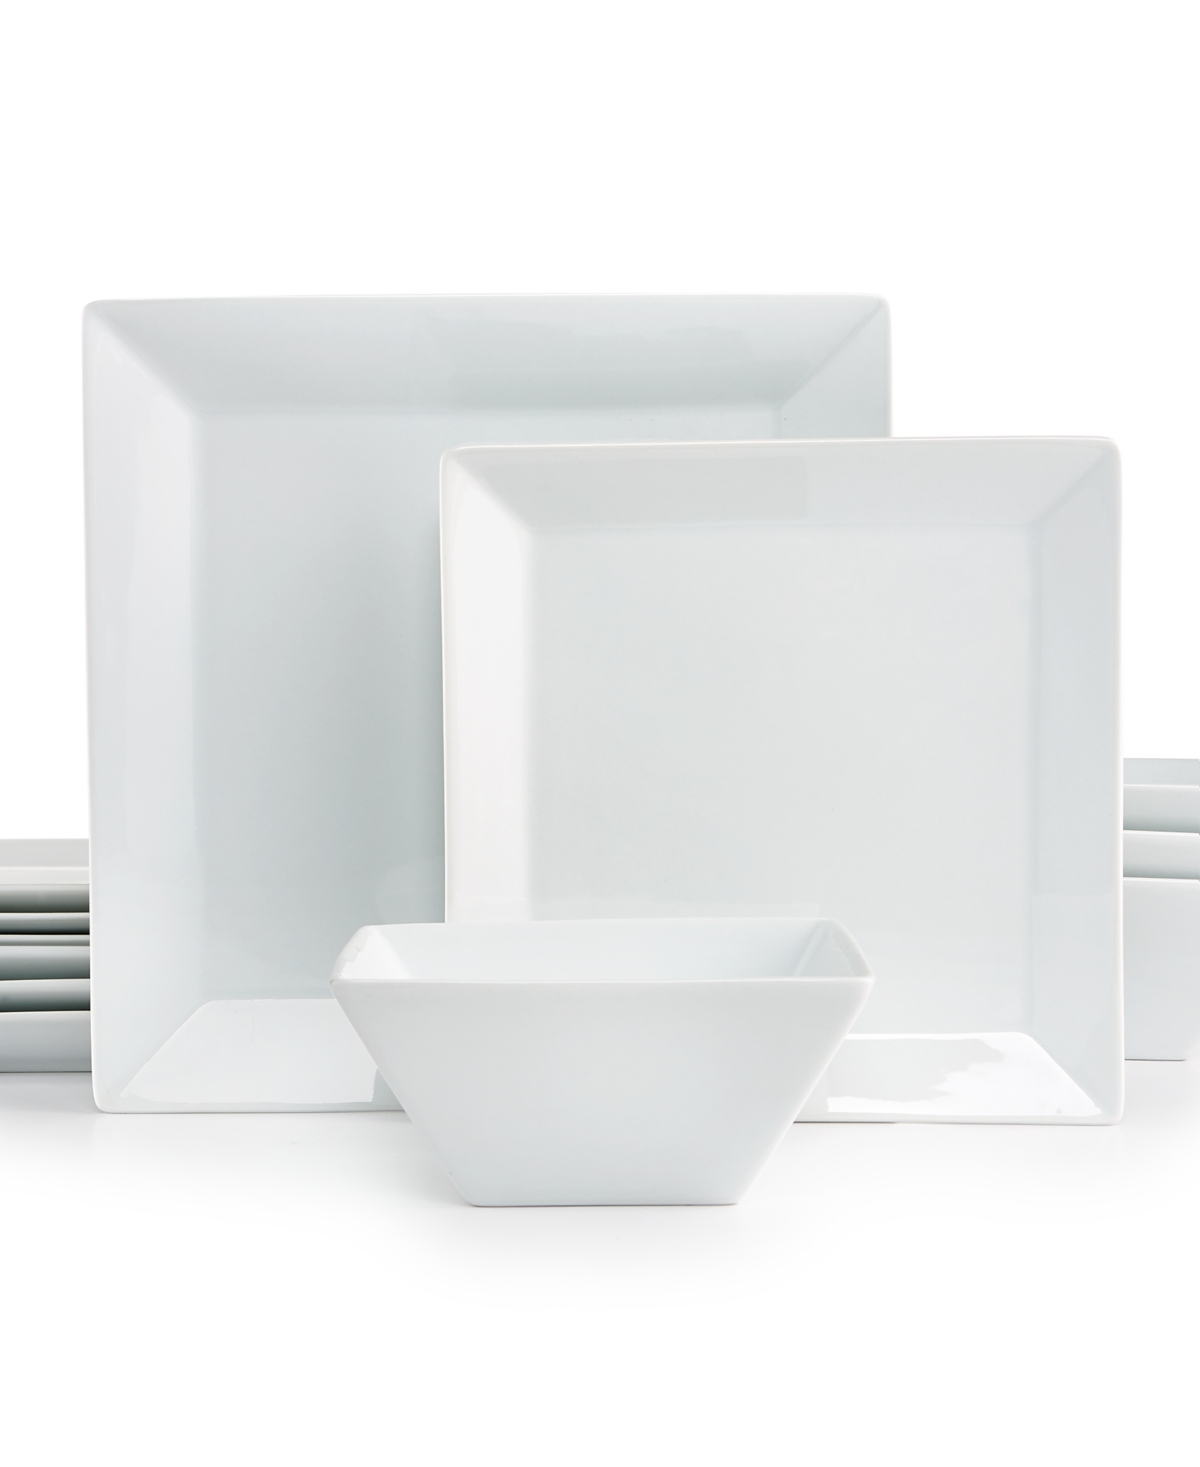 12 Pc. Square Dinnerware Set, Service for 4, Created for Macy's